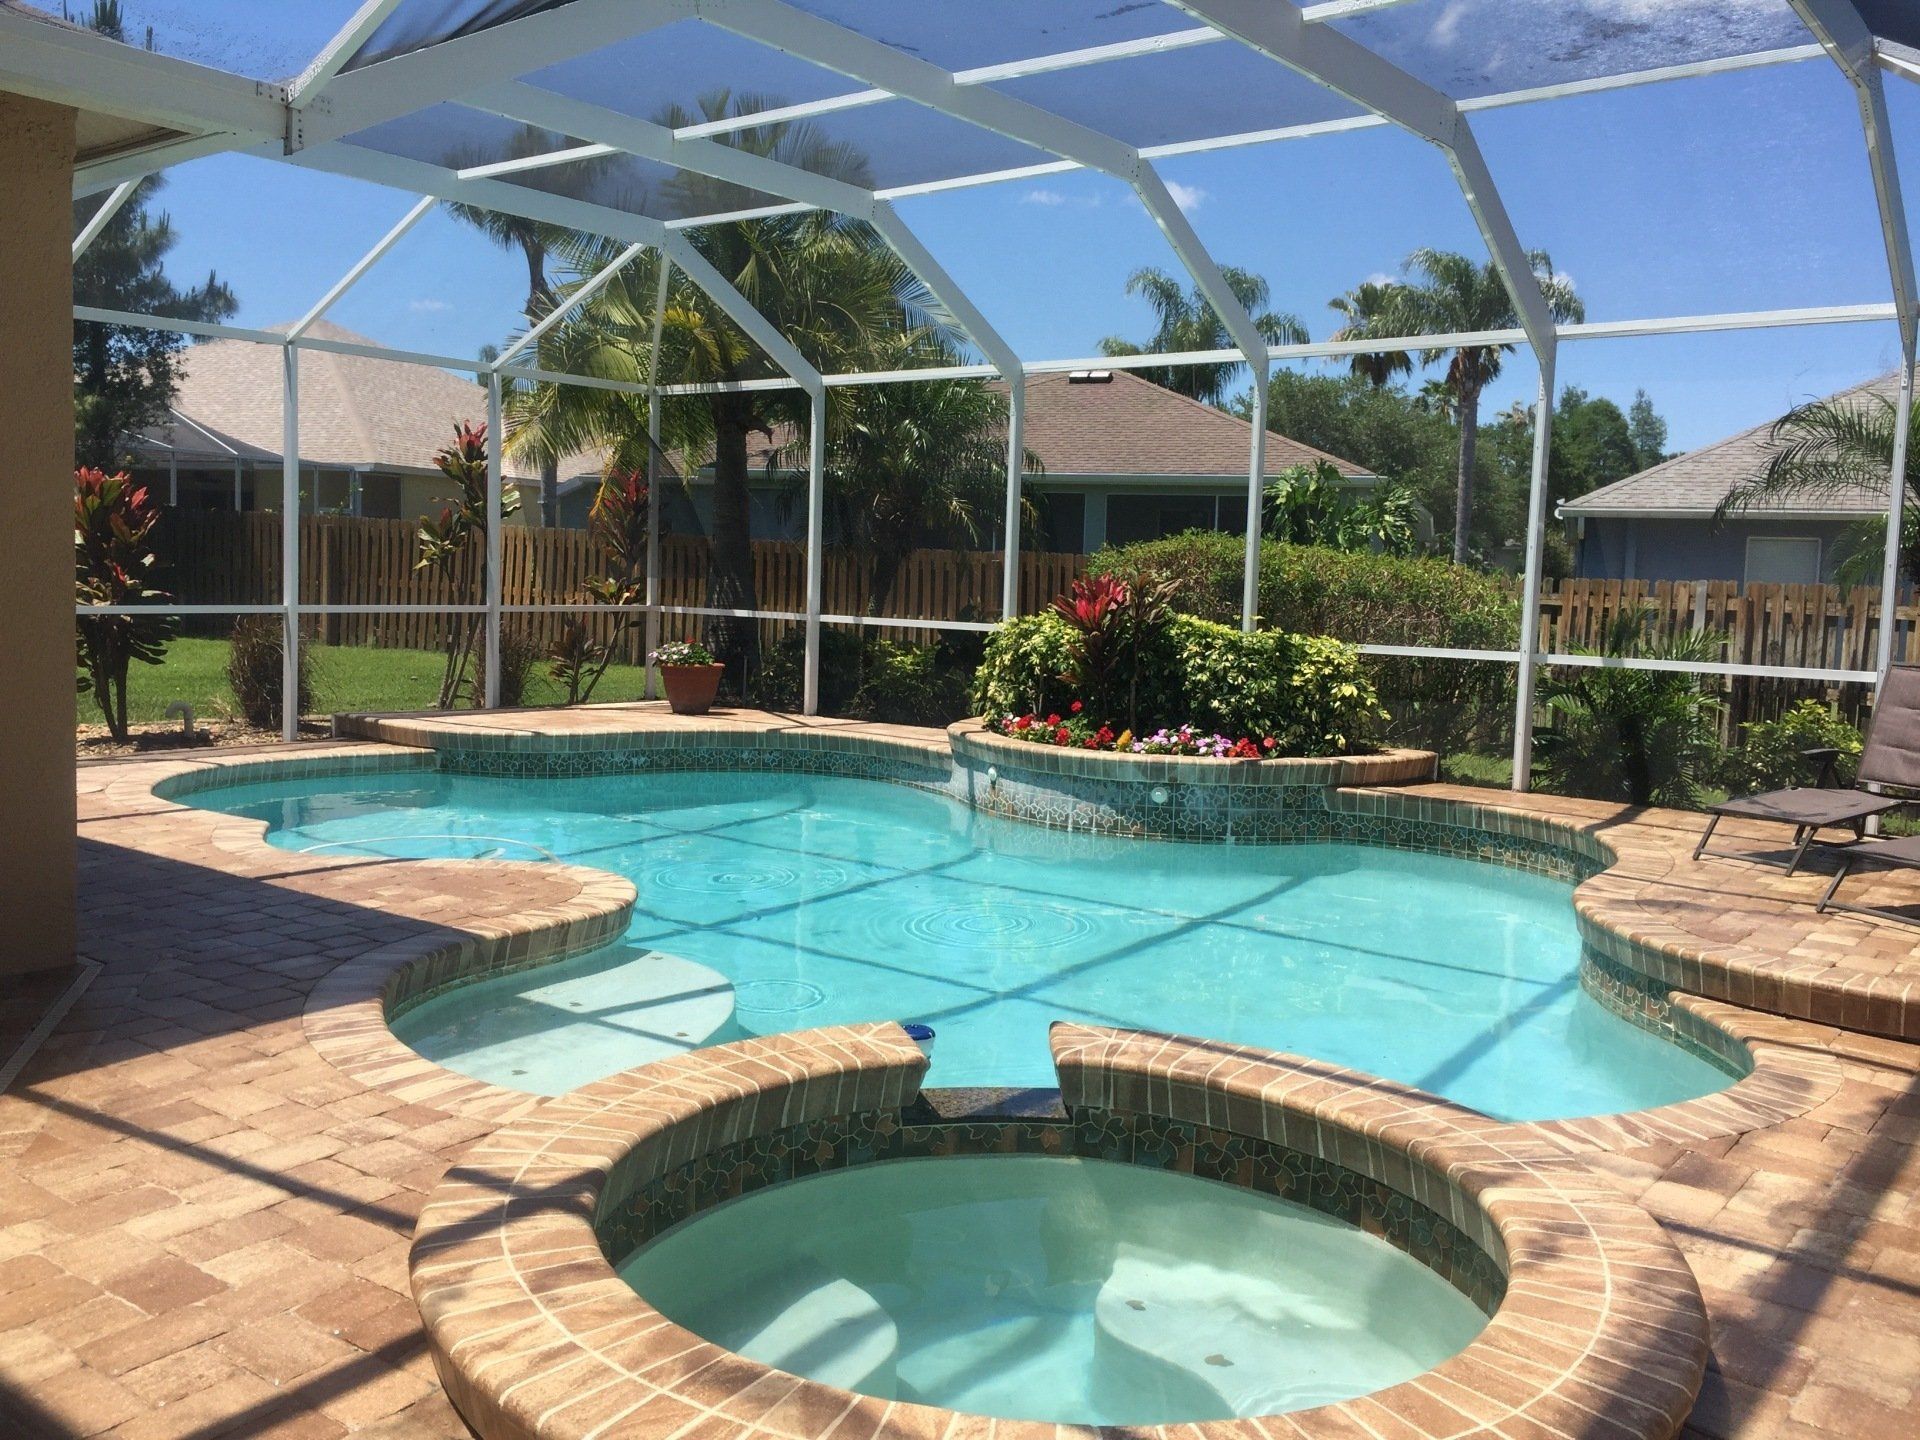 pool cage cleaning | Tampa, FL | First Response Pressure Wash